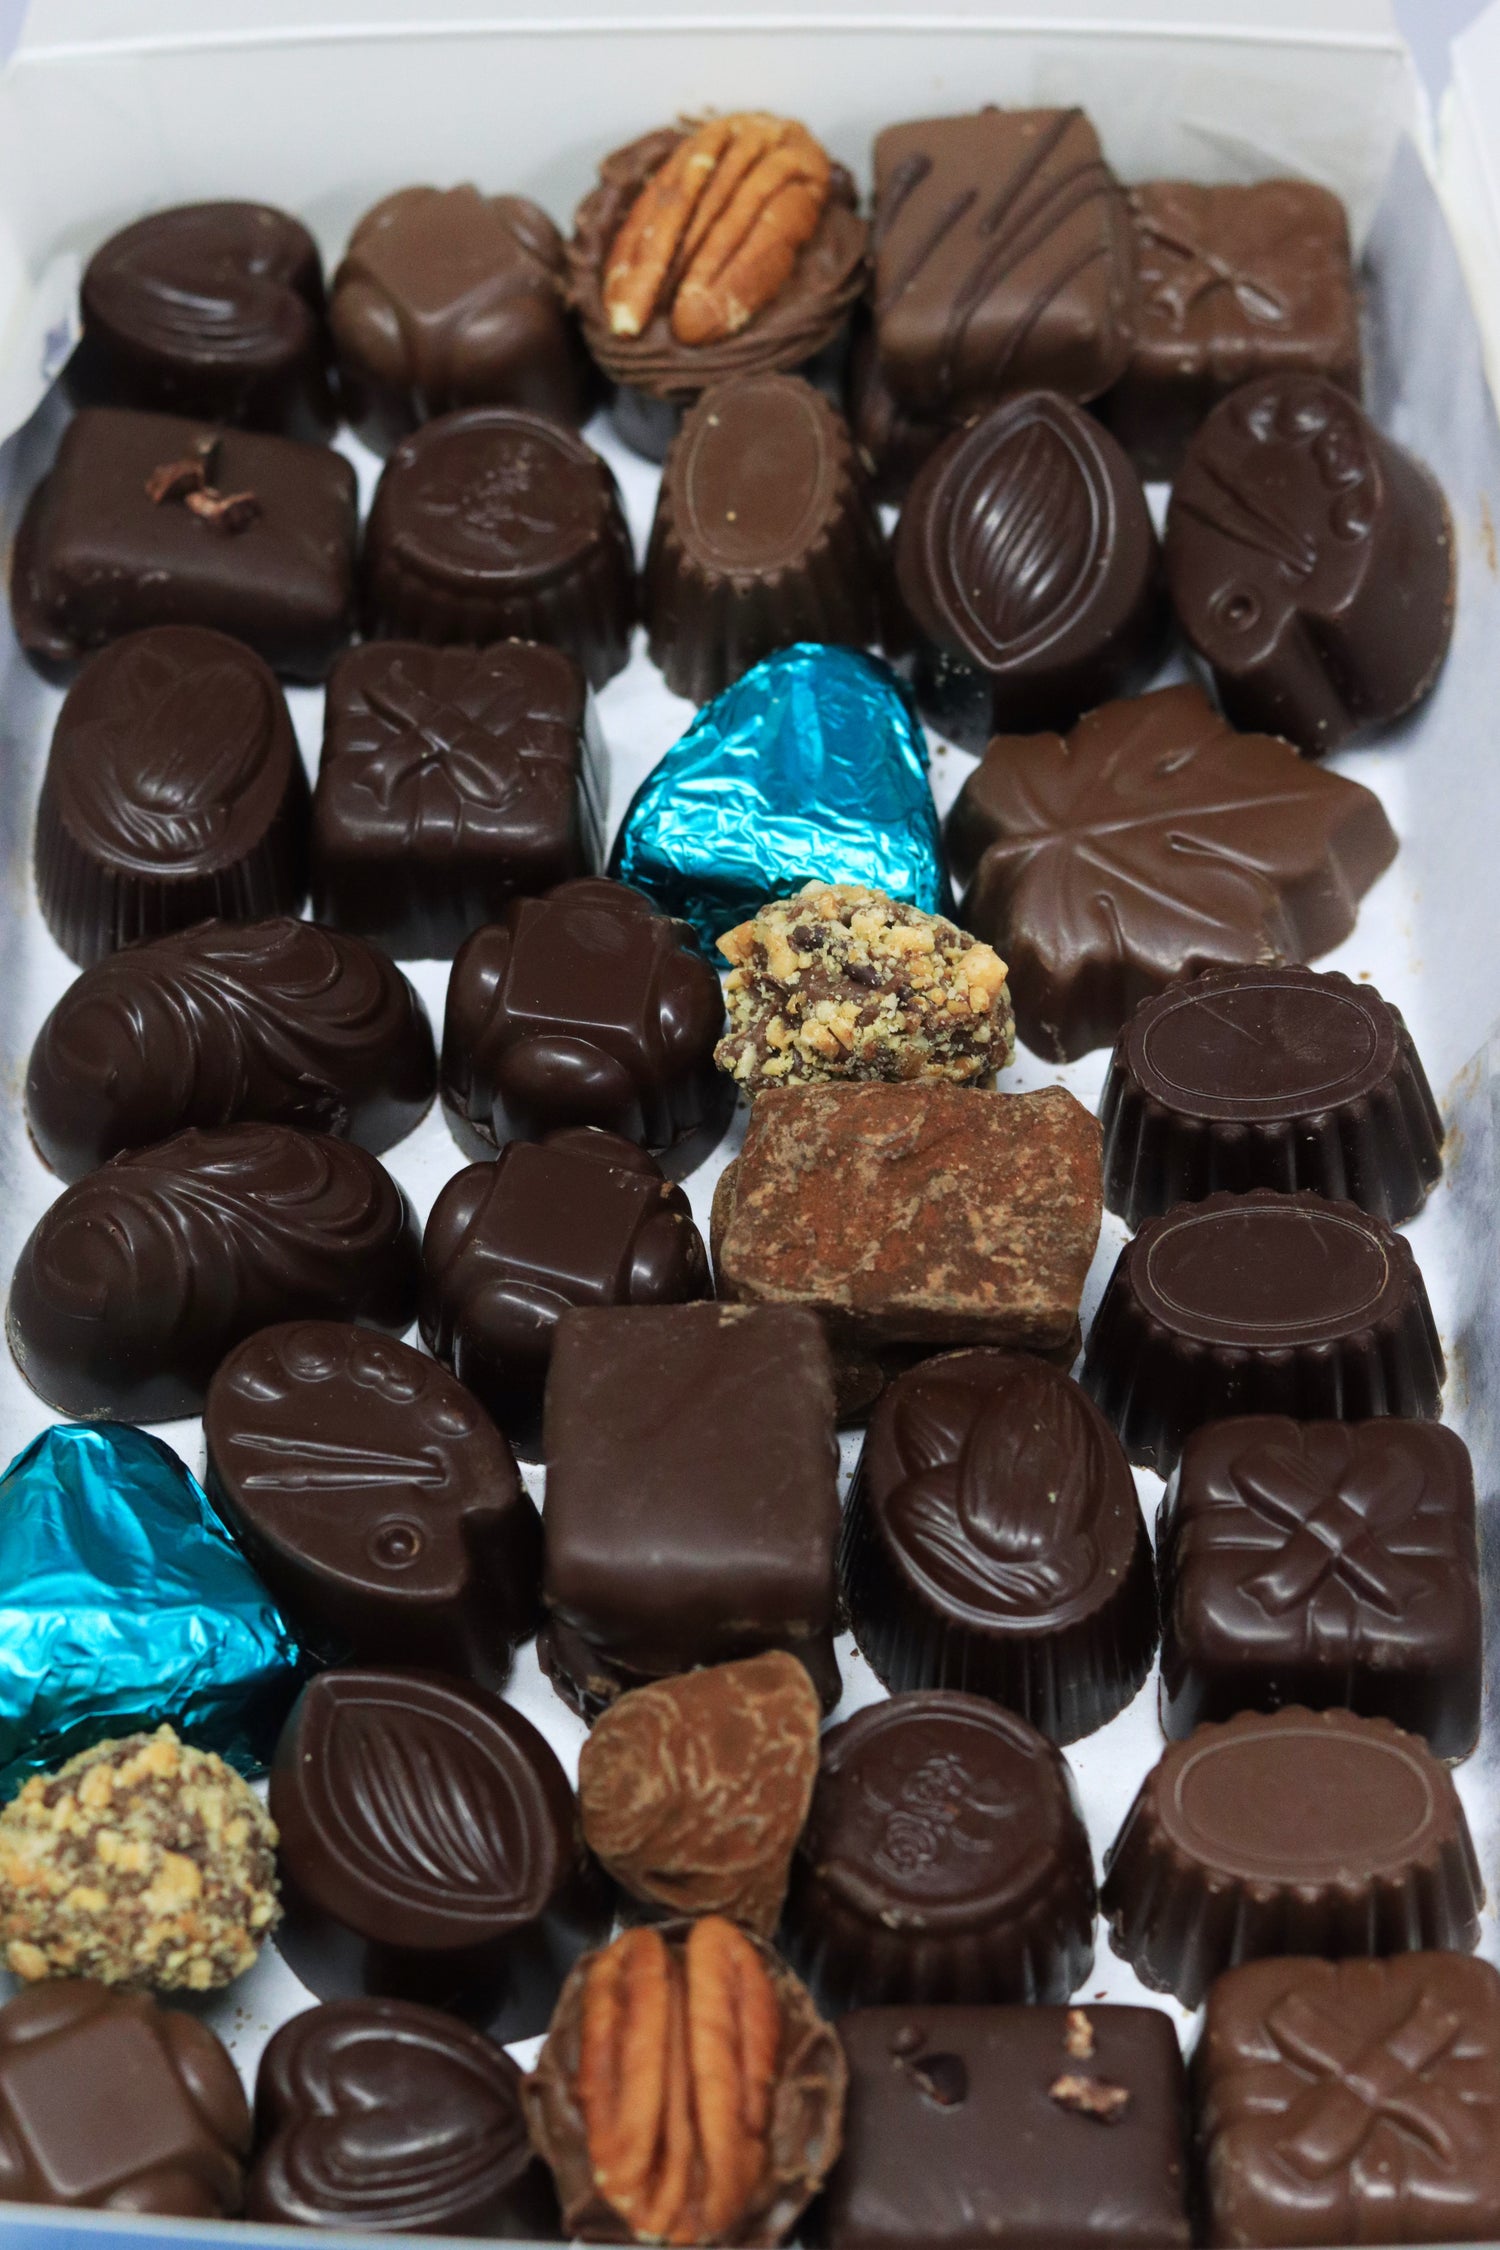 inside box of 500g 40 piece chocolate confections